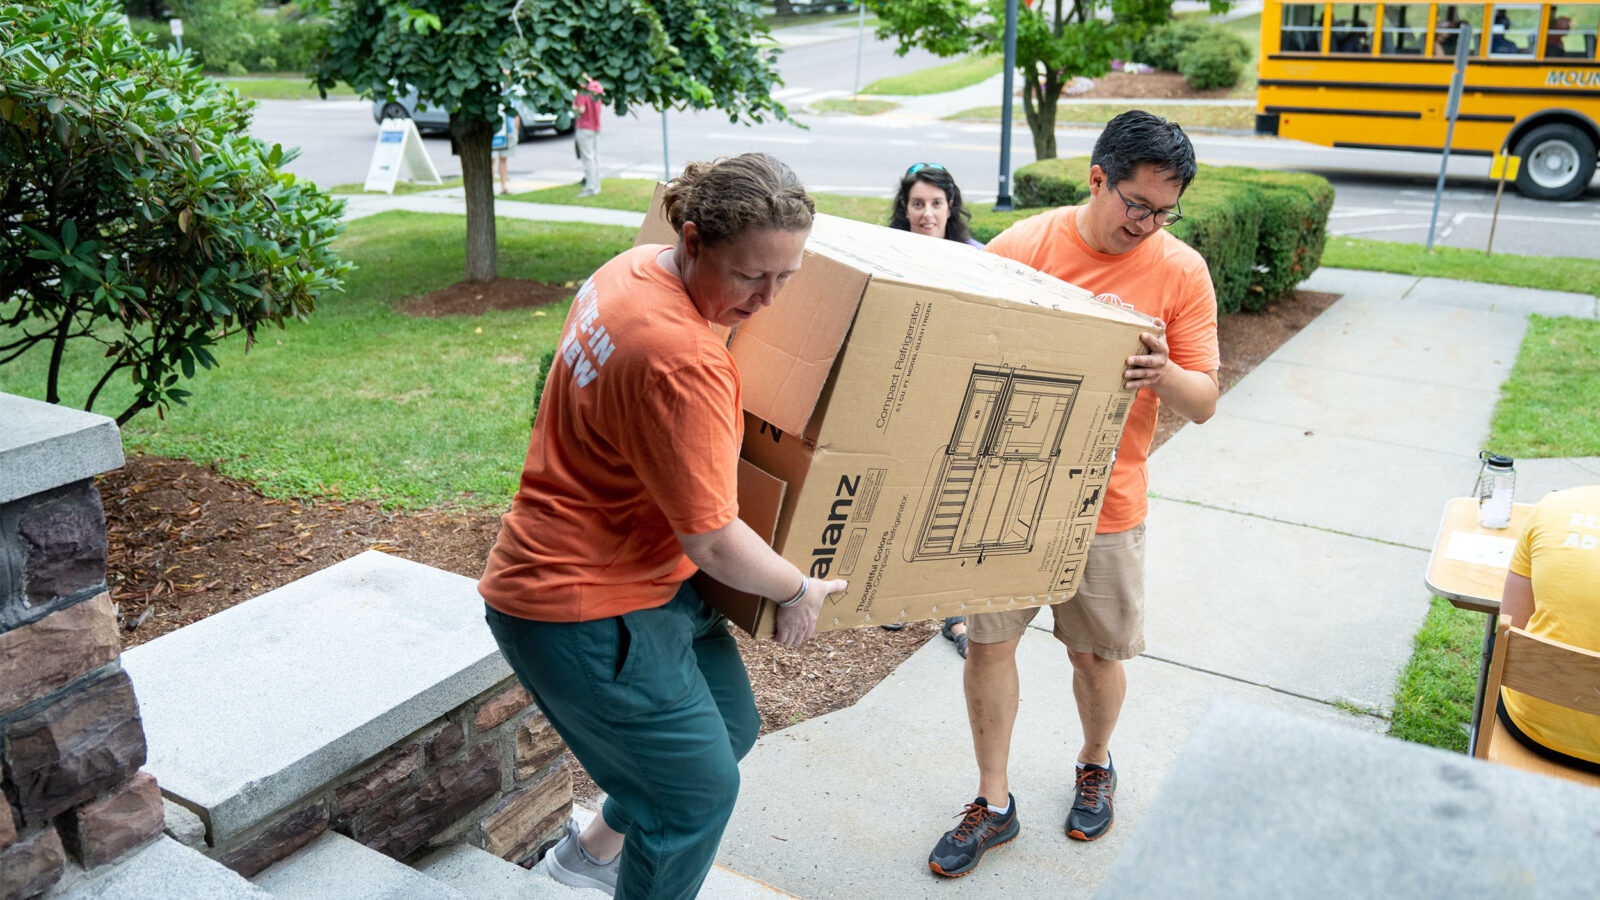 President Hernandez helps carry a box on move in day